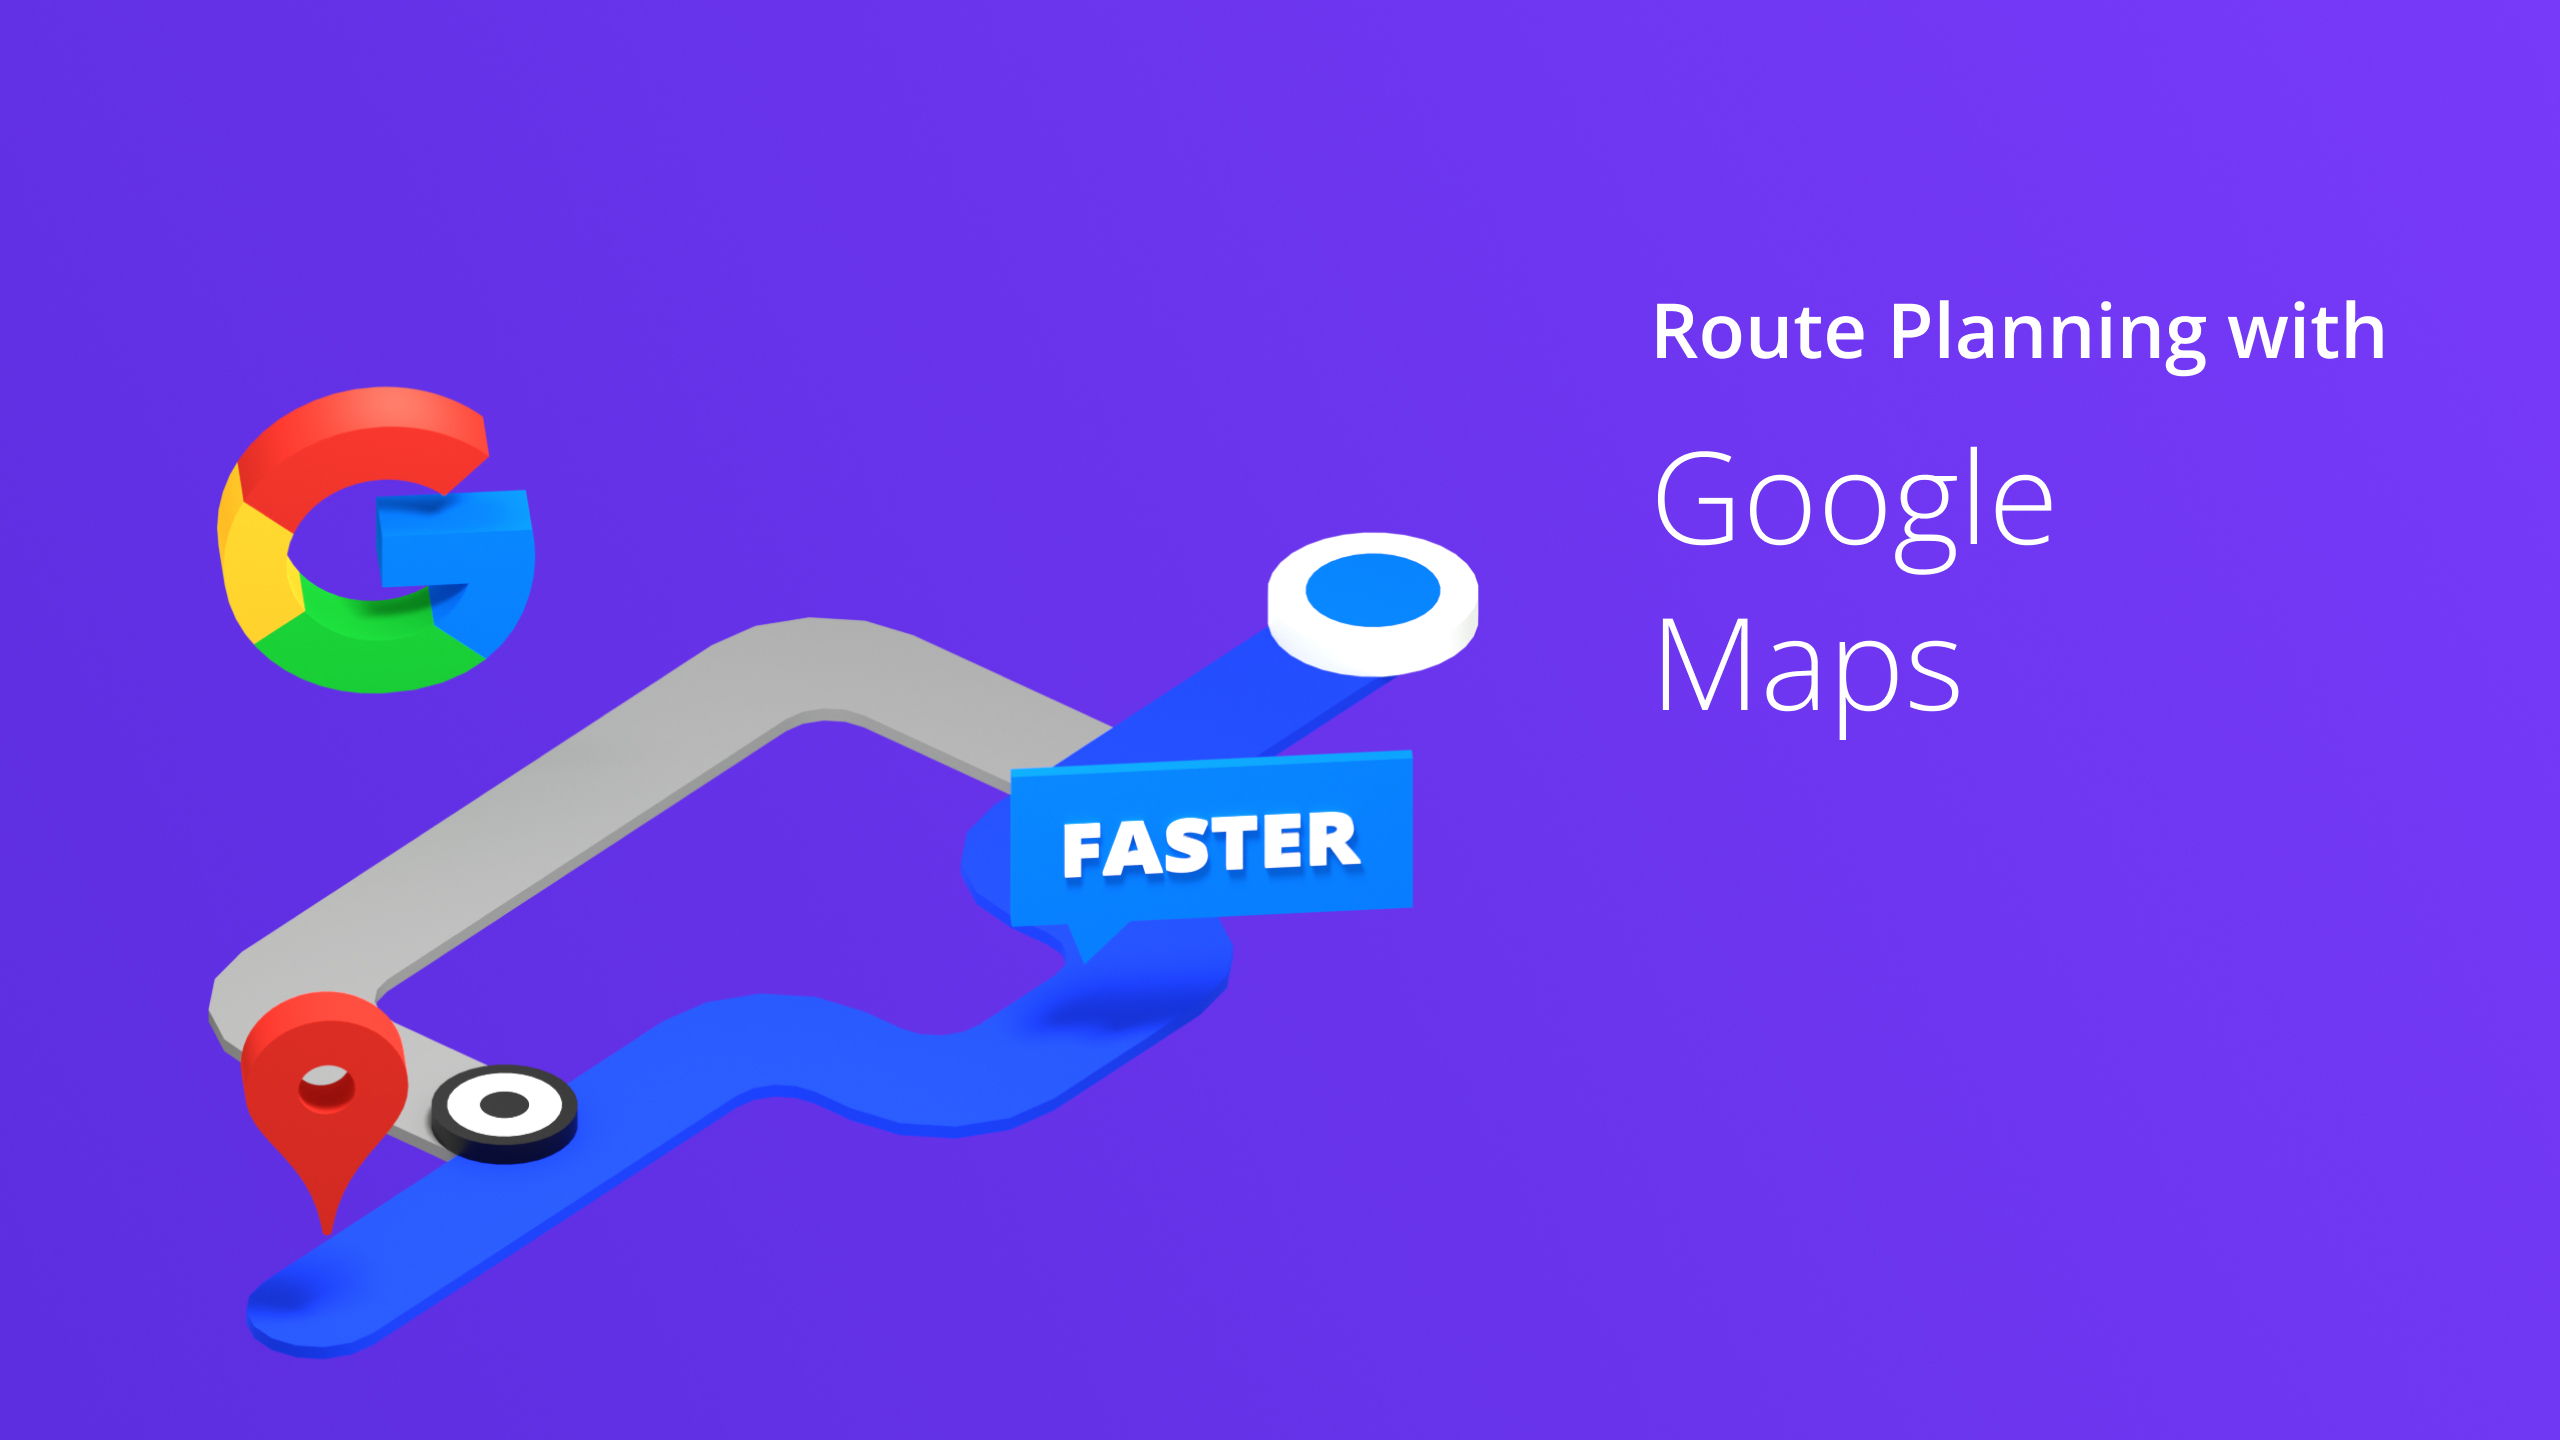 Custom Image - Route Planning with Google Maps